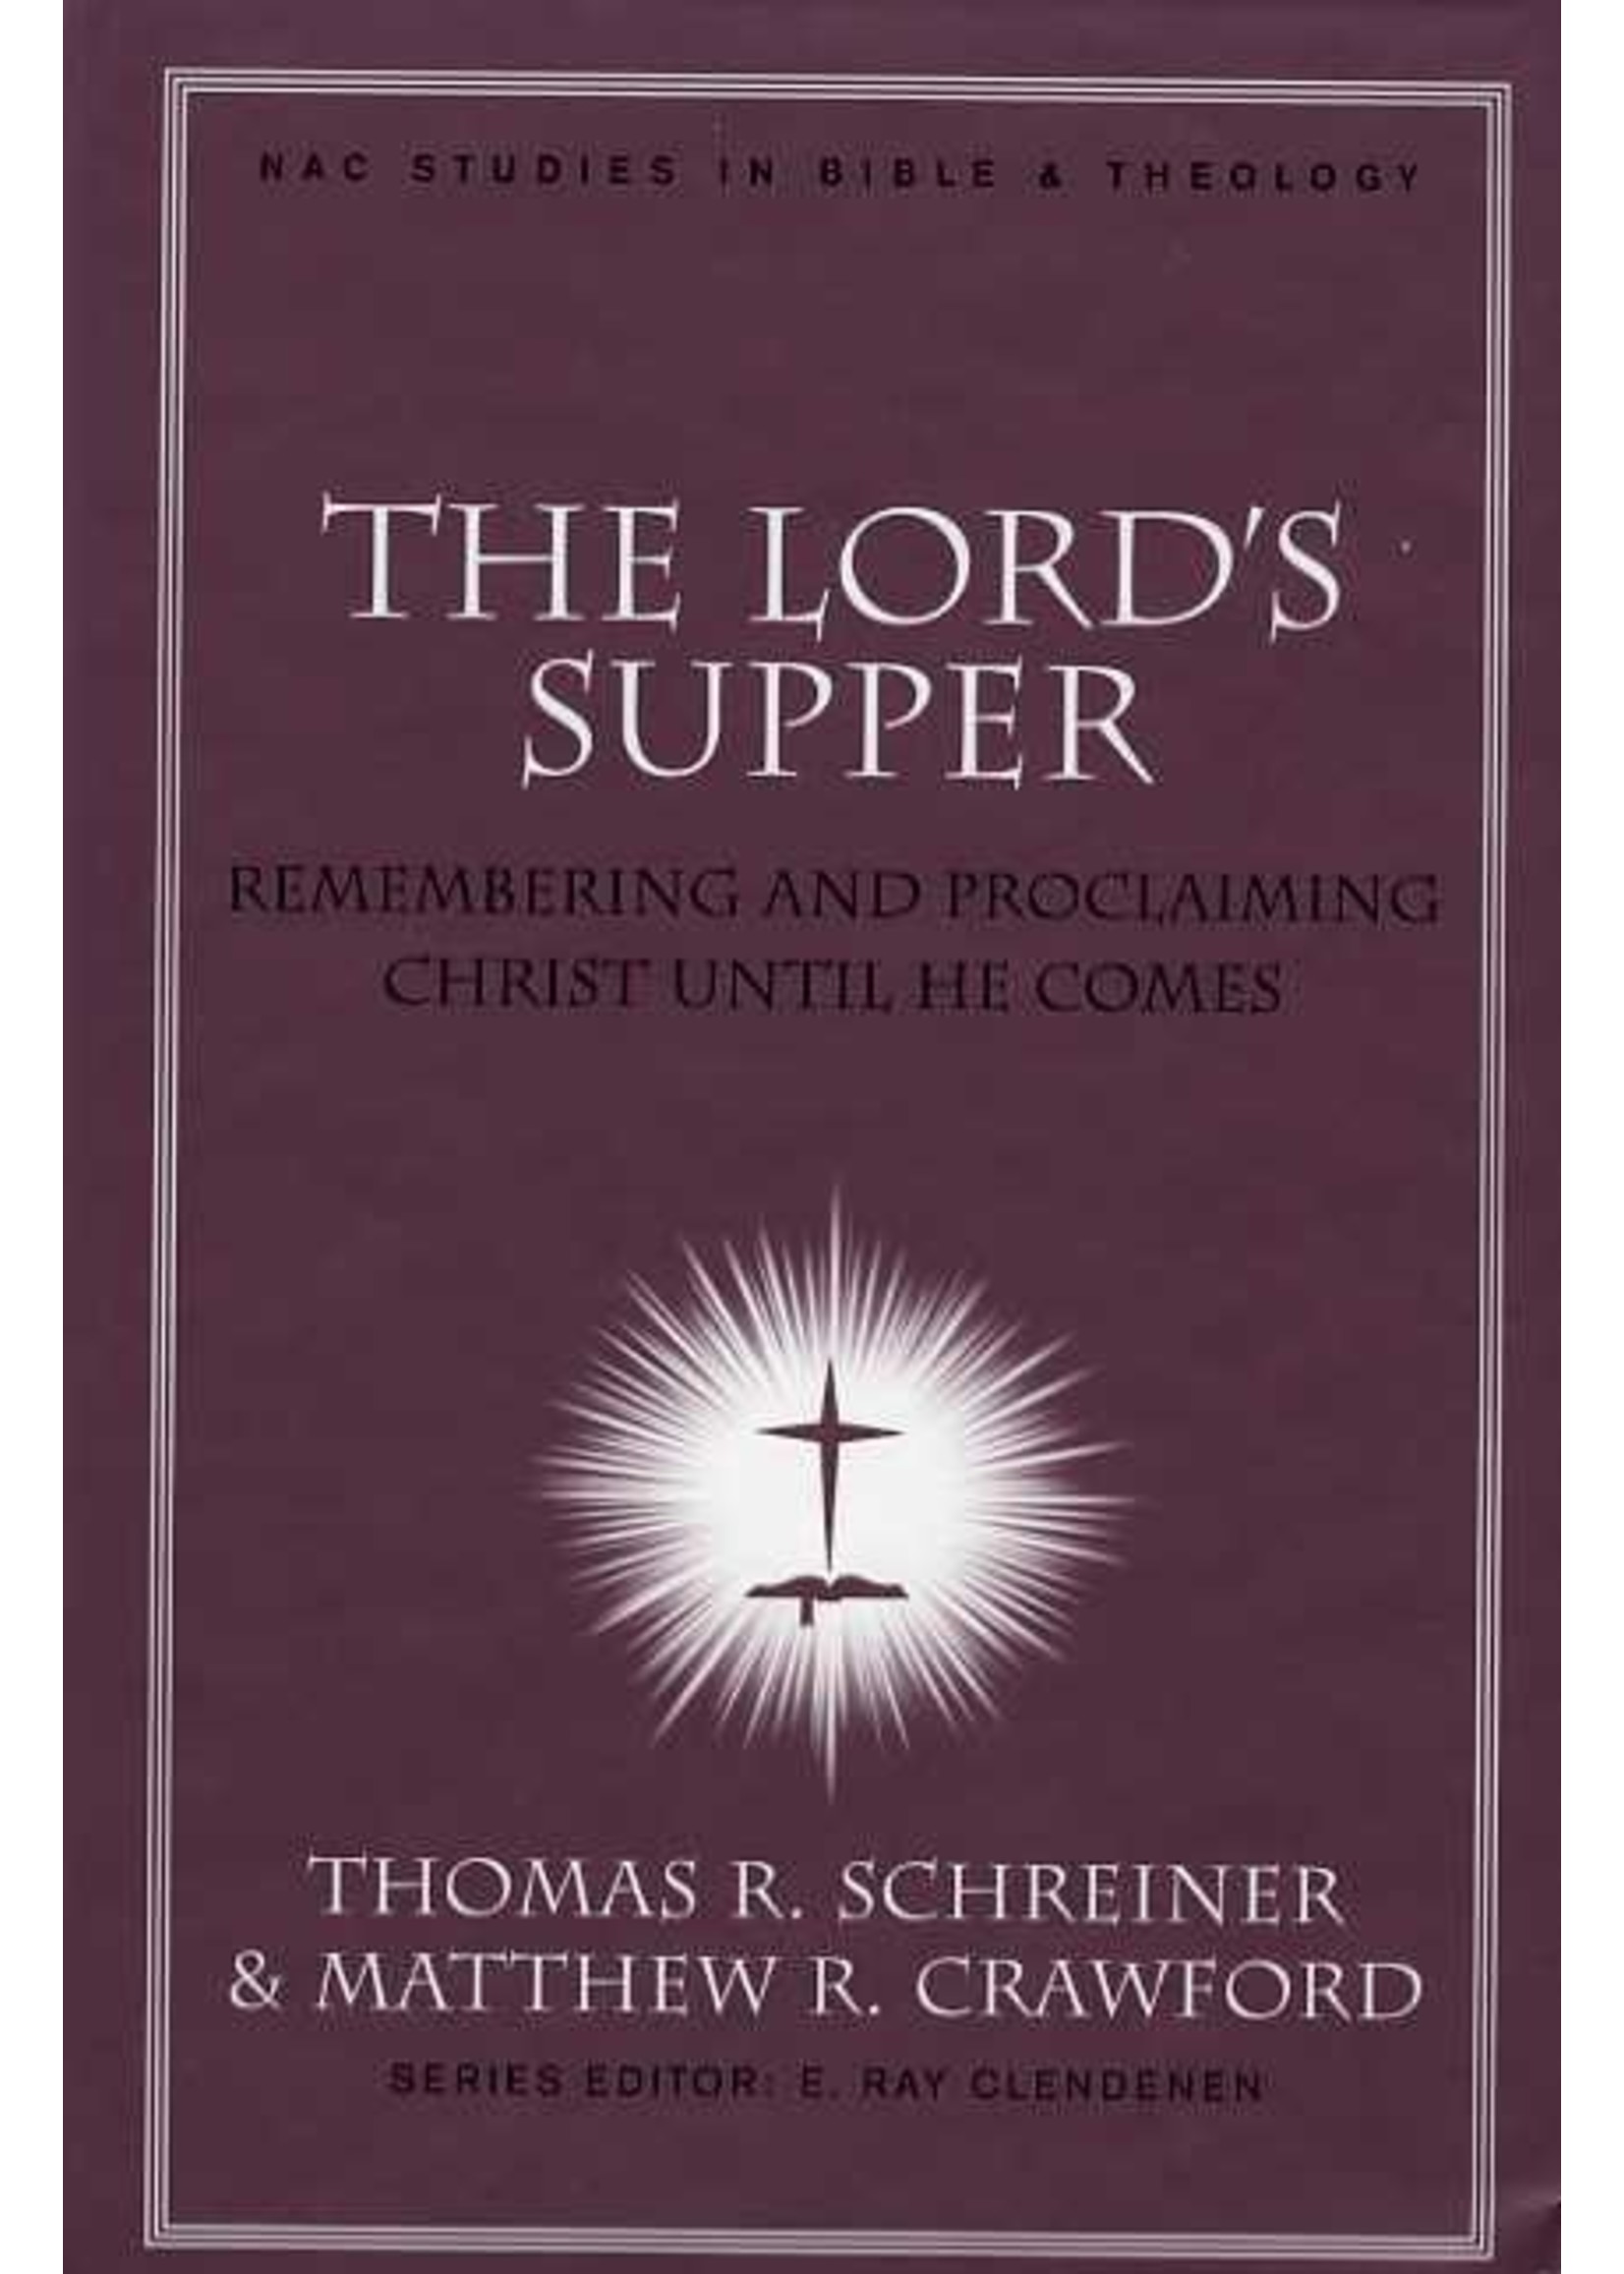 B&H Publishing The Lord's Supper - Thomas Schreiner